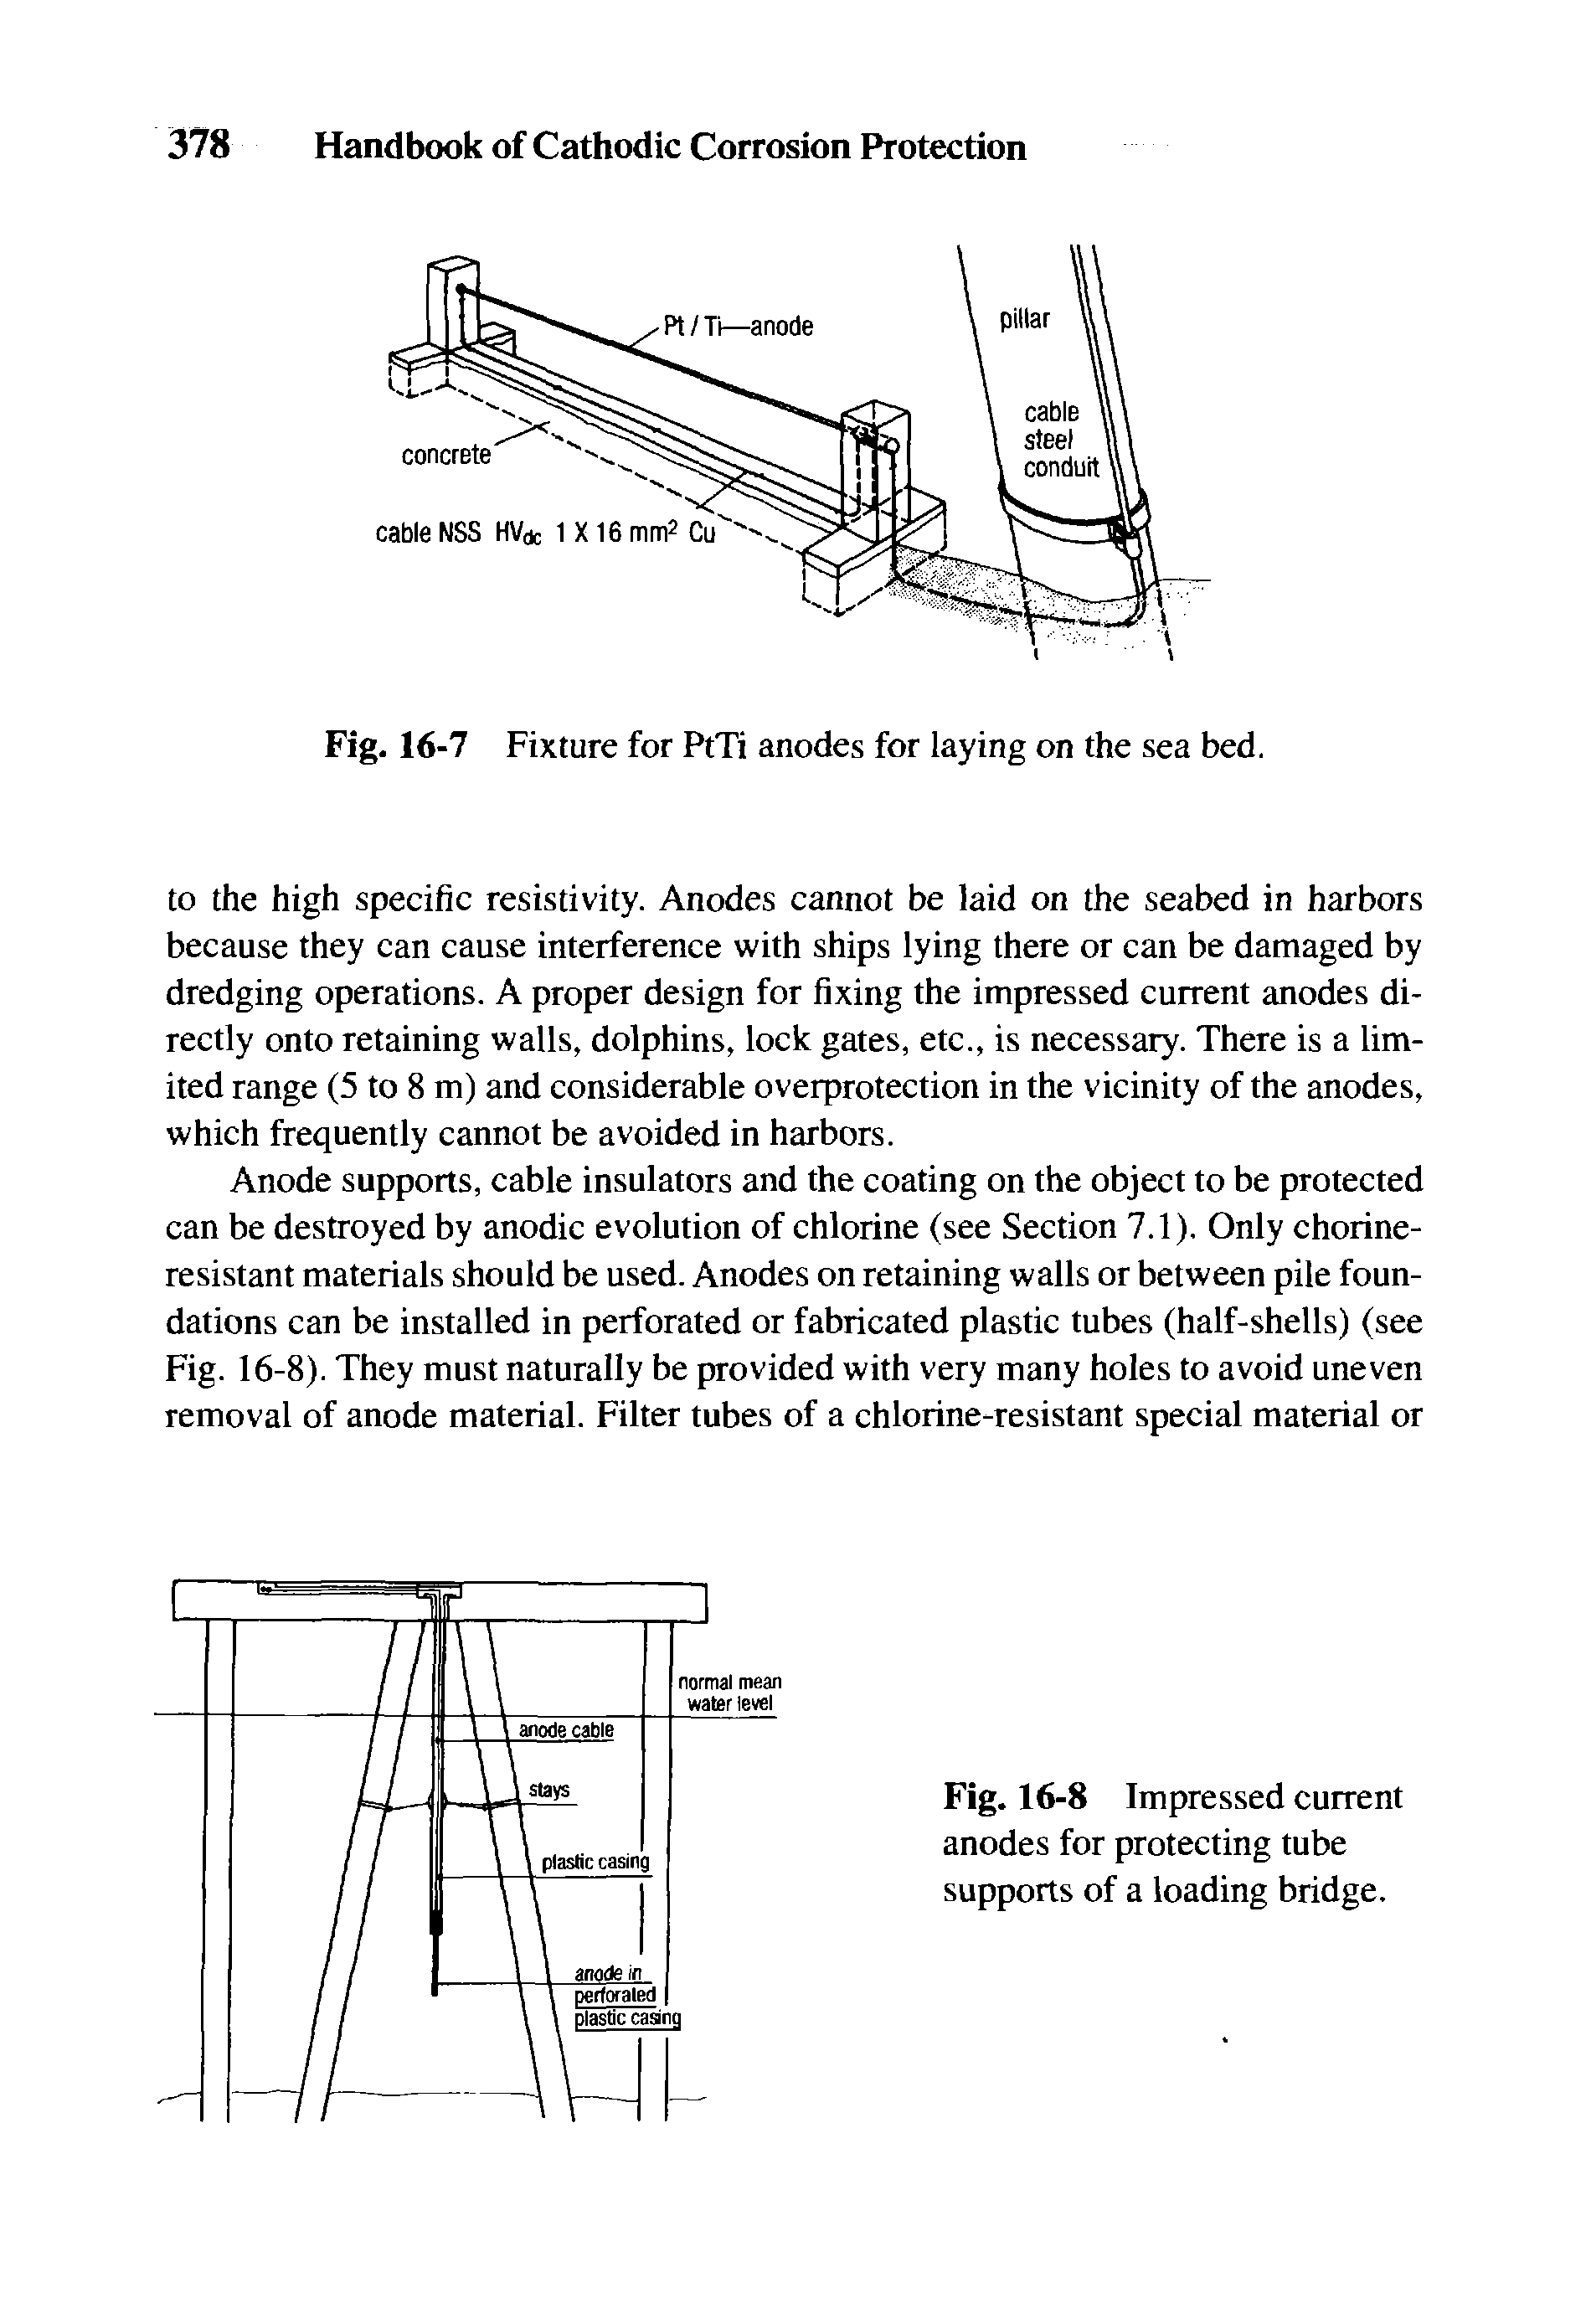 Fig. 16-8 Impressed current anodes for protecting tube supports of a loading bridge.